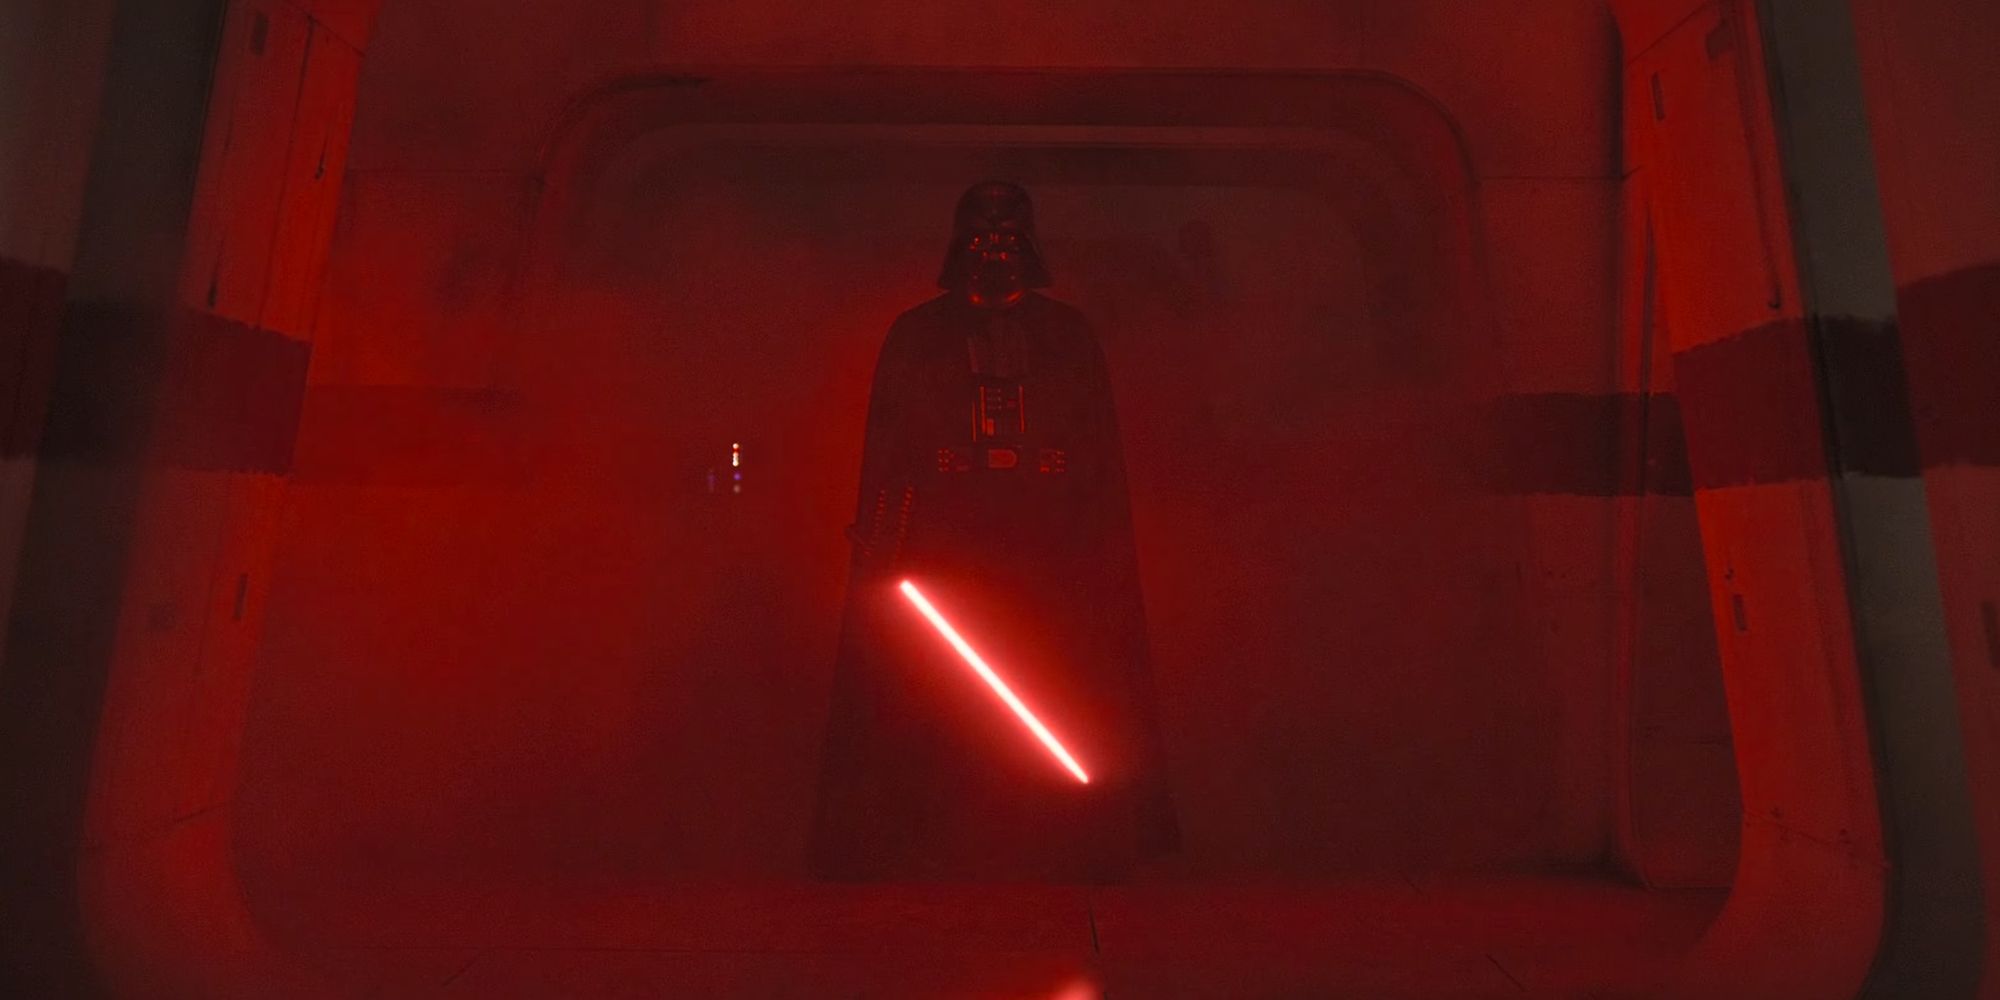 Darth Vader igniting his lightsaber in the hallway if Rogue One A Star Wars Story